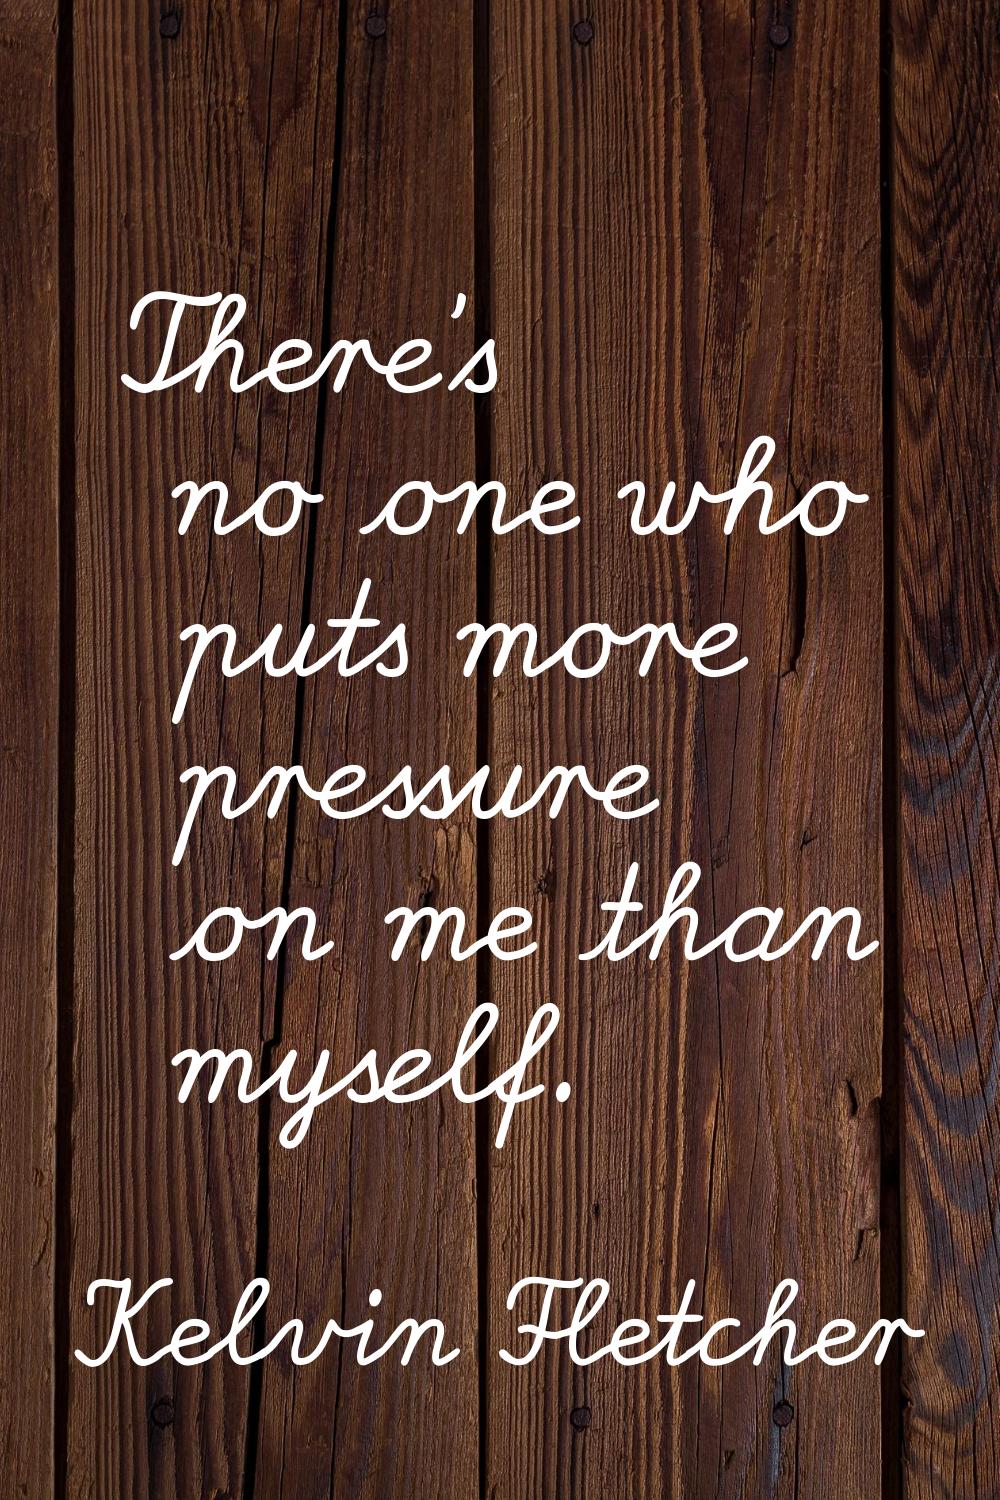 There's no one who puts more pressure on me than myself.